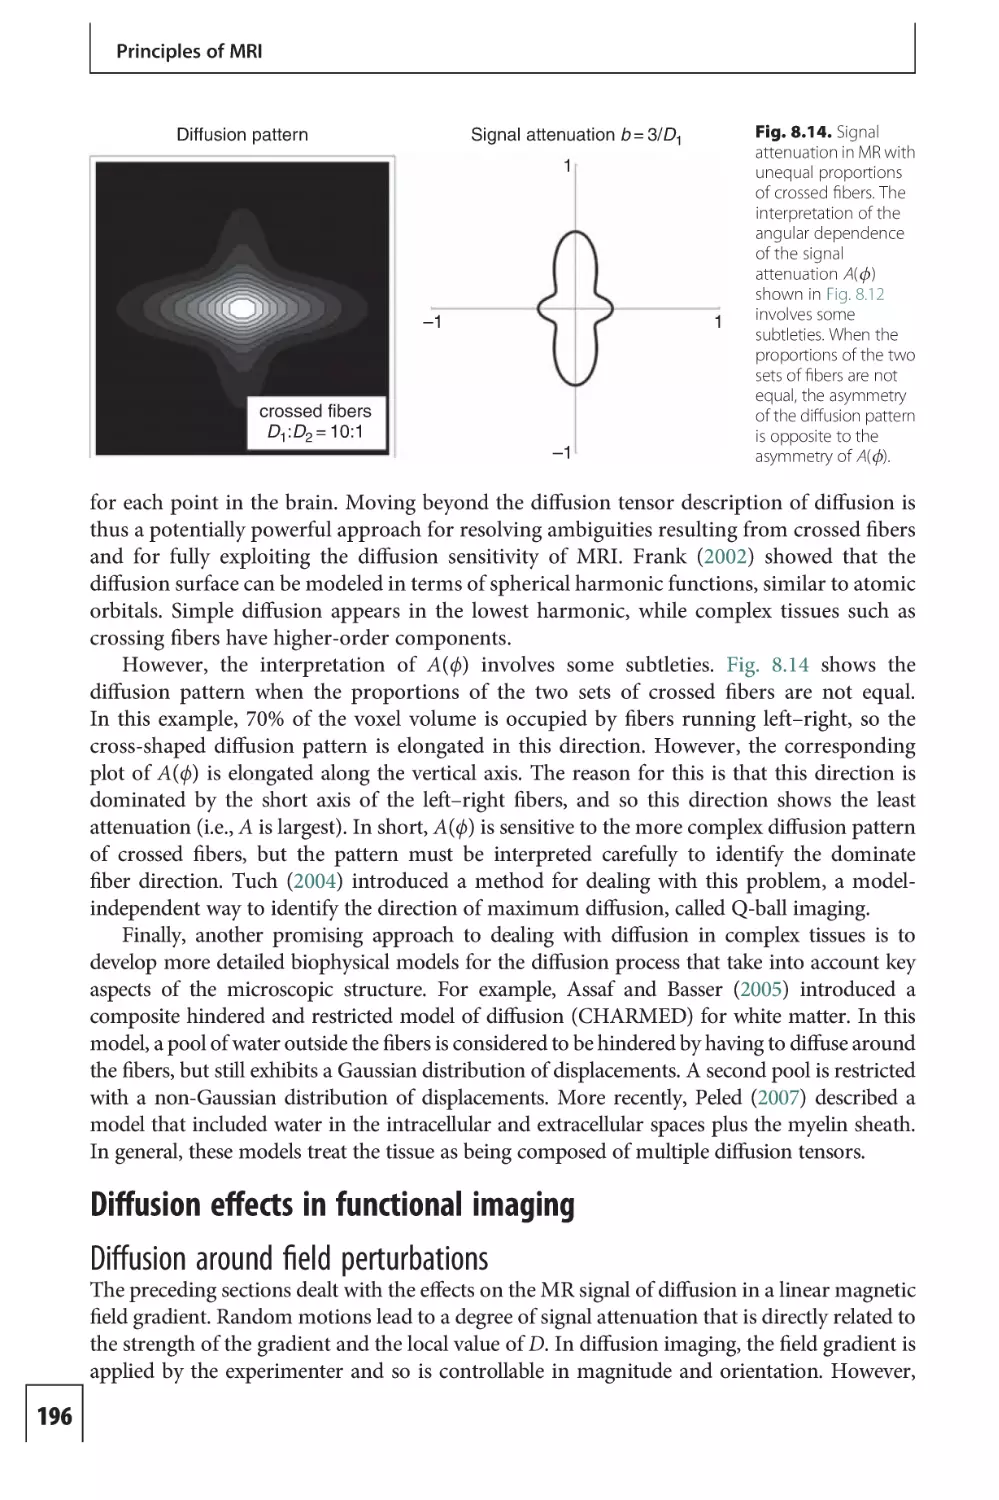 Diffusion effects in functional imaging
Diffusion around field perturbations